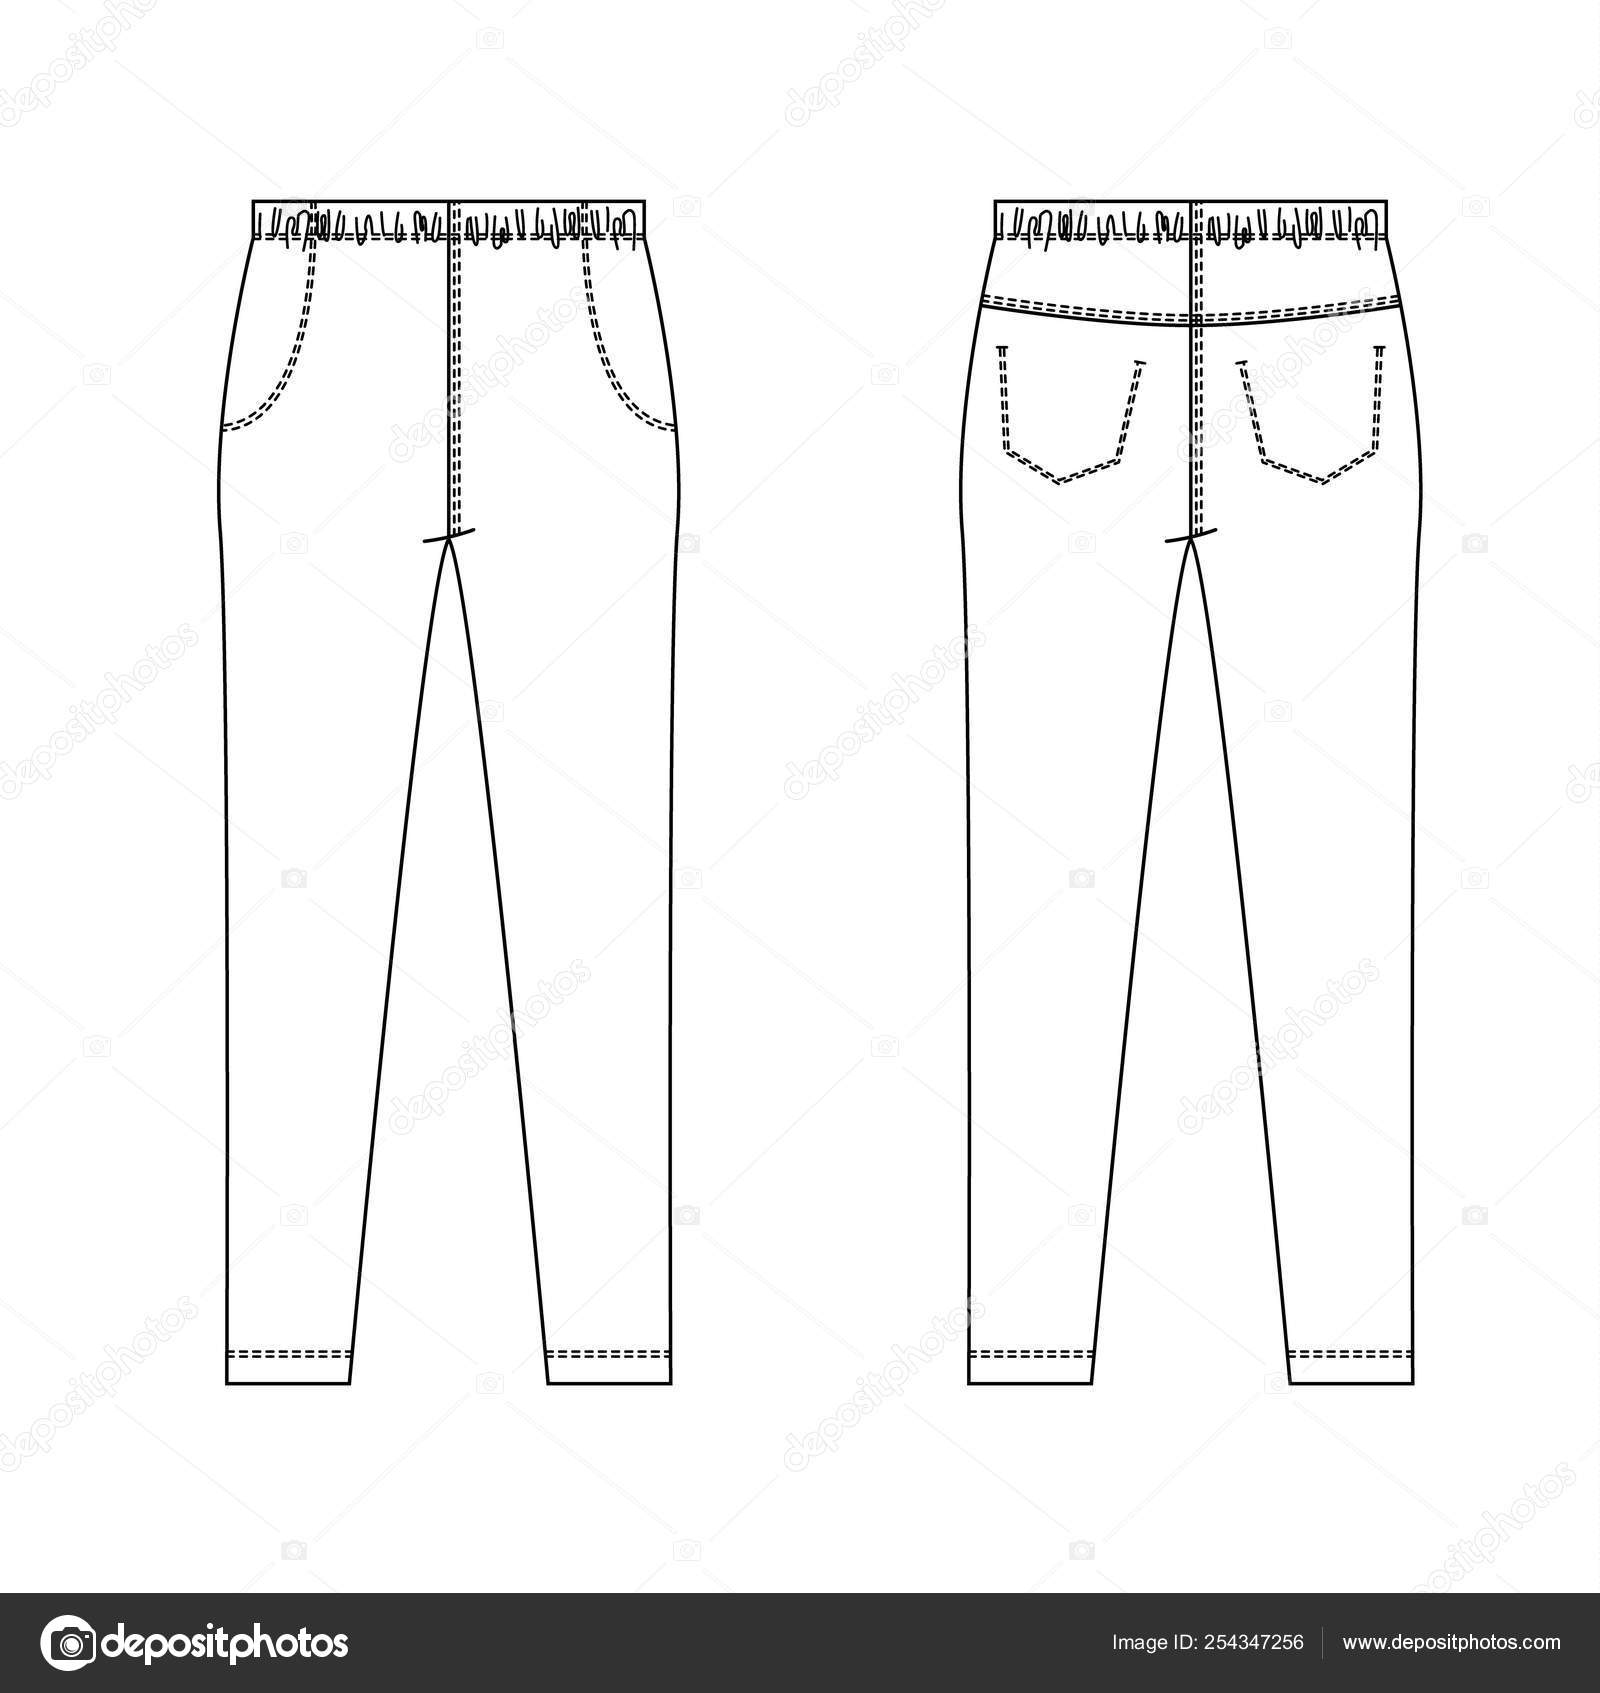 Technical drawing of childrens fashion. Jeans pants with pockets for ...